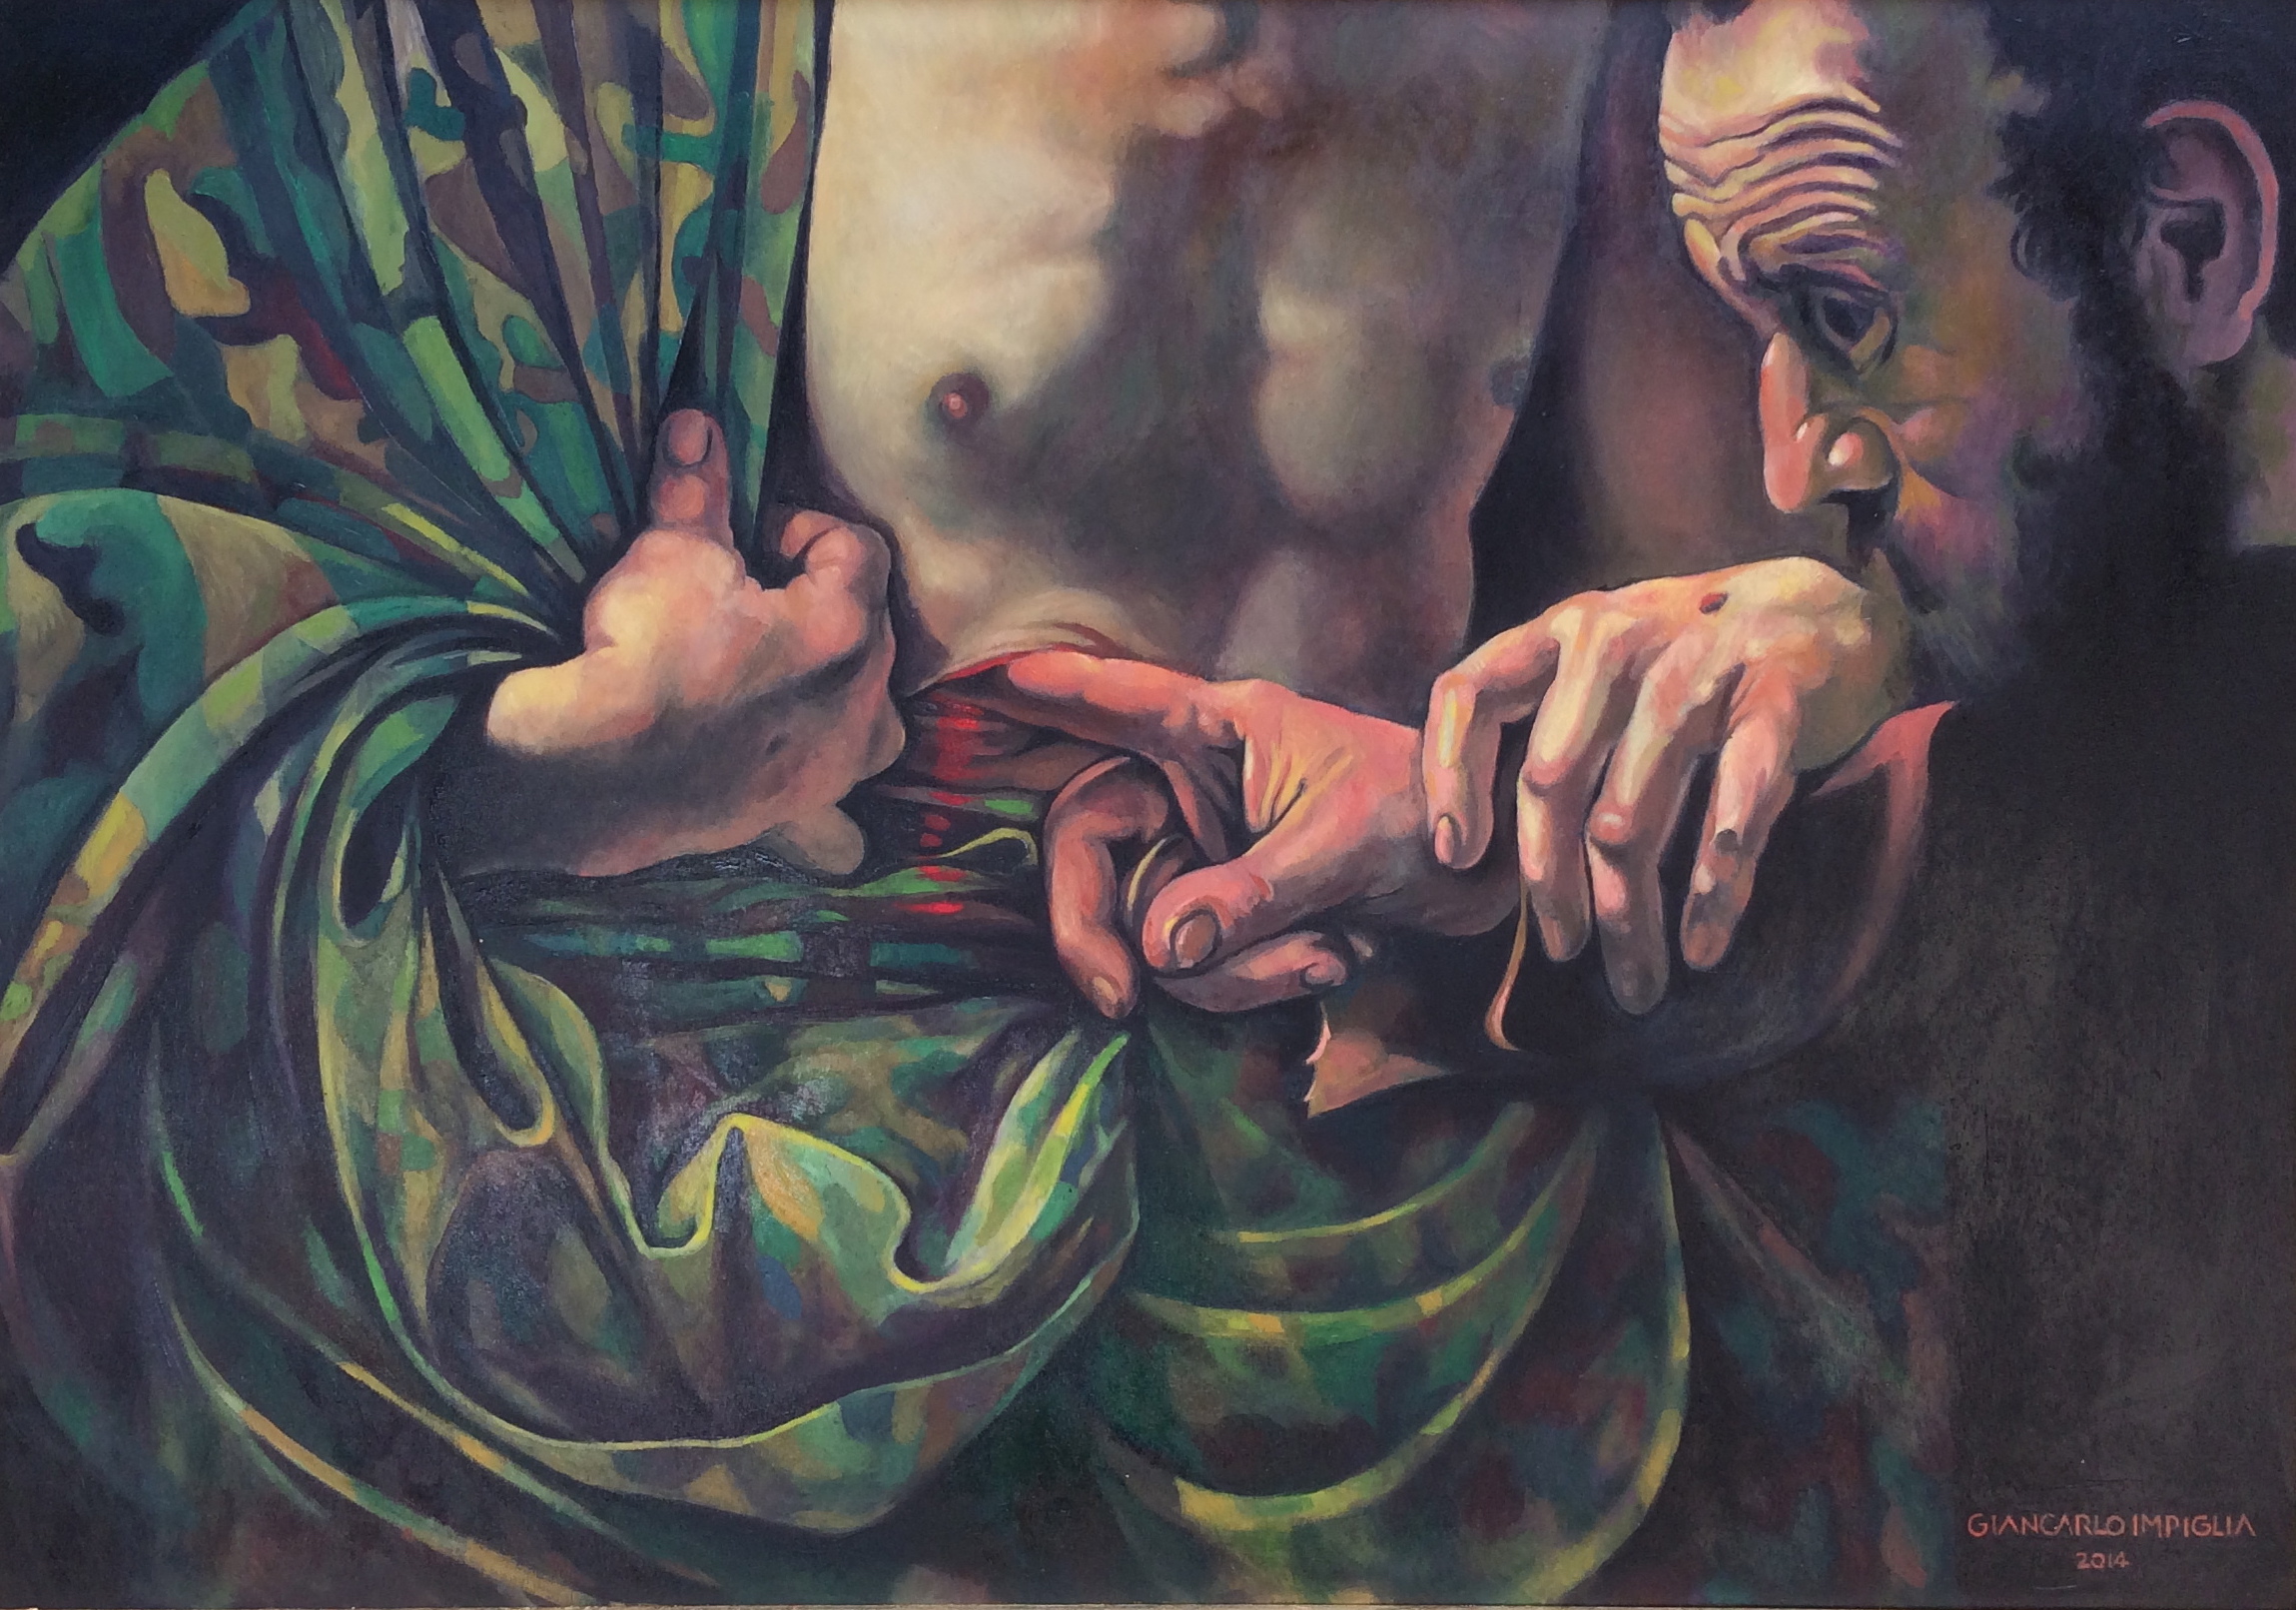   The Wound , 2014, Oil on canvas, 36 x 25" 